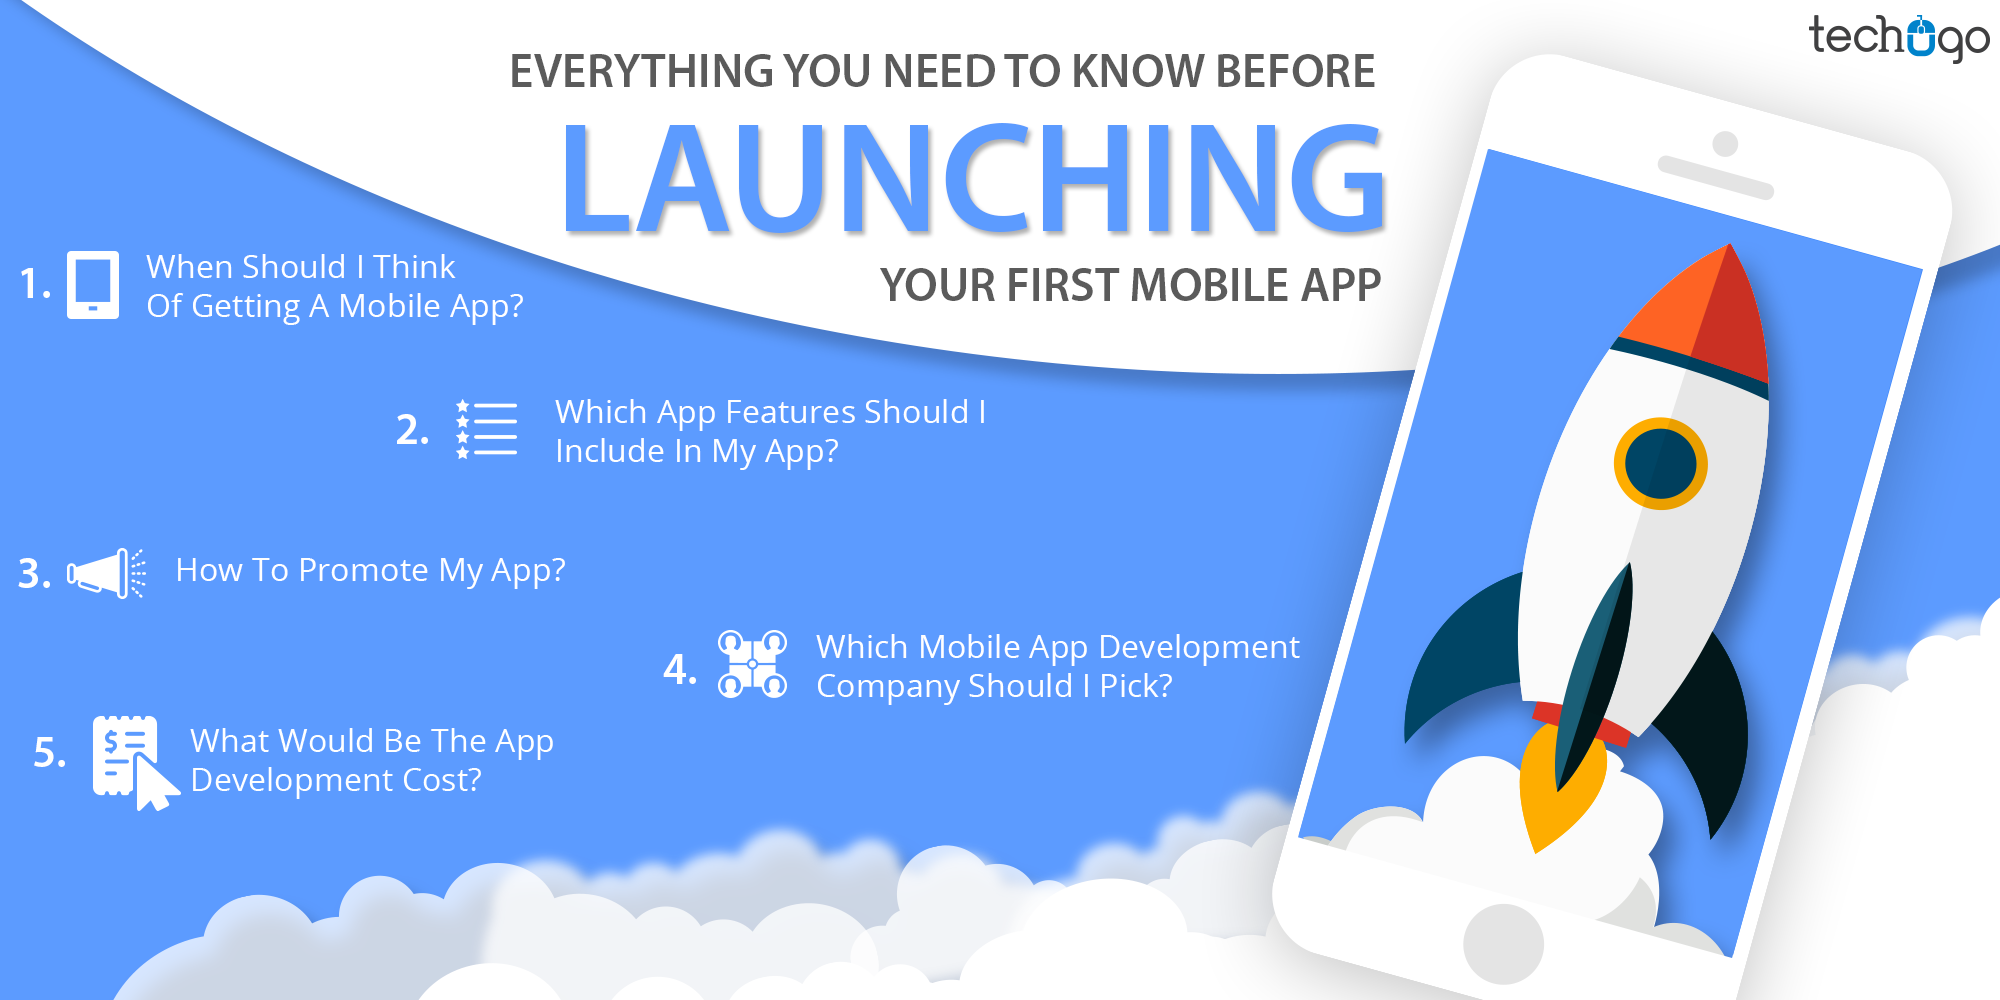 Everything You Need To Know Before Launching Your First Mobile App